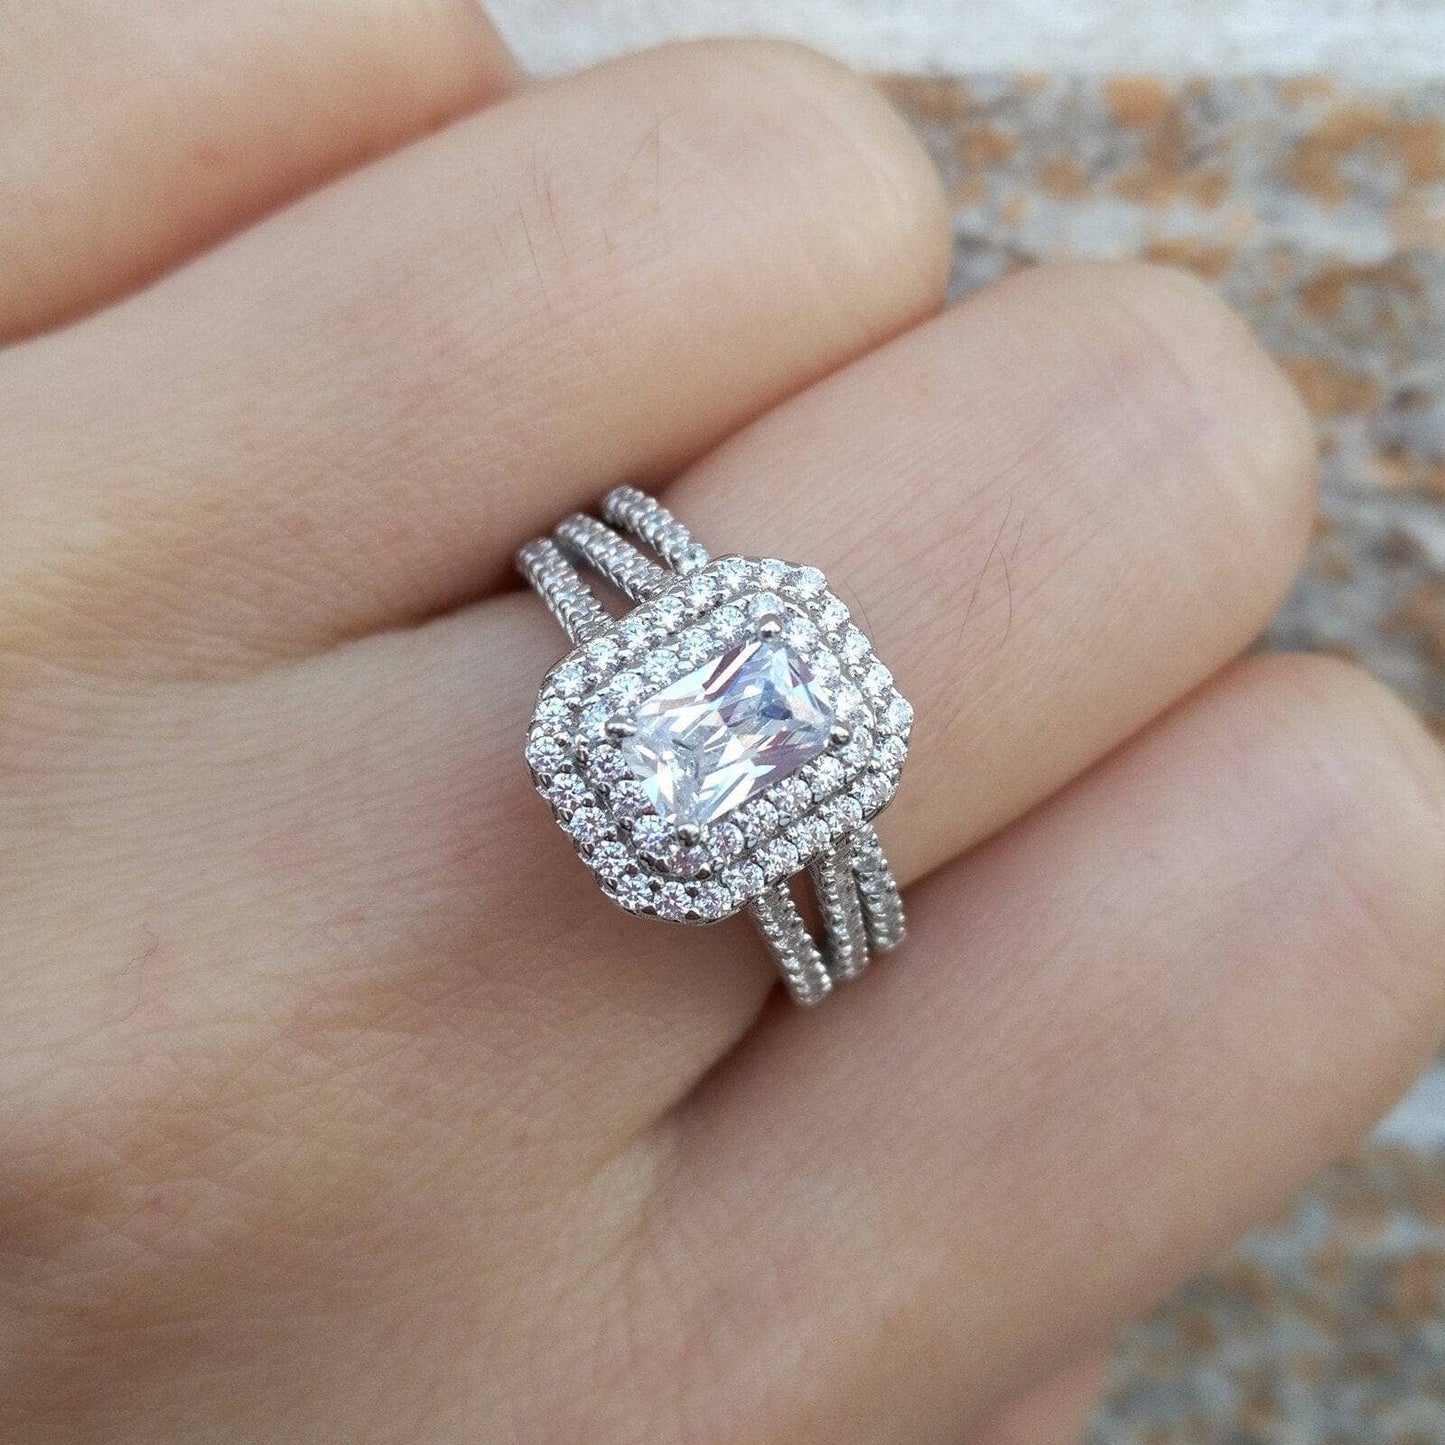 925 Sterling Silver White Radiant Cut Cubic Zirconia Ring Set